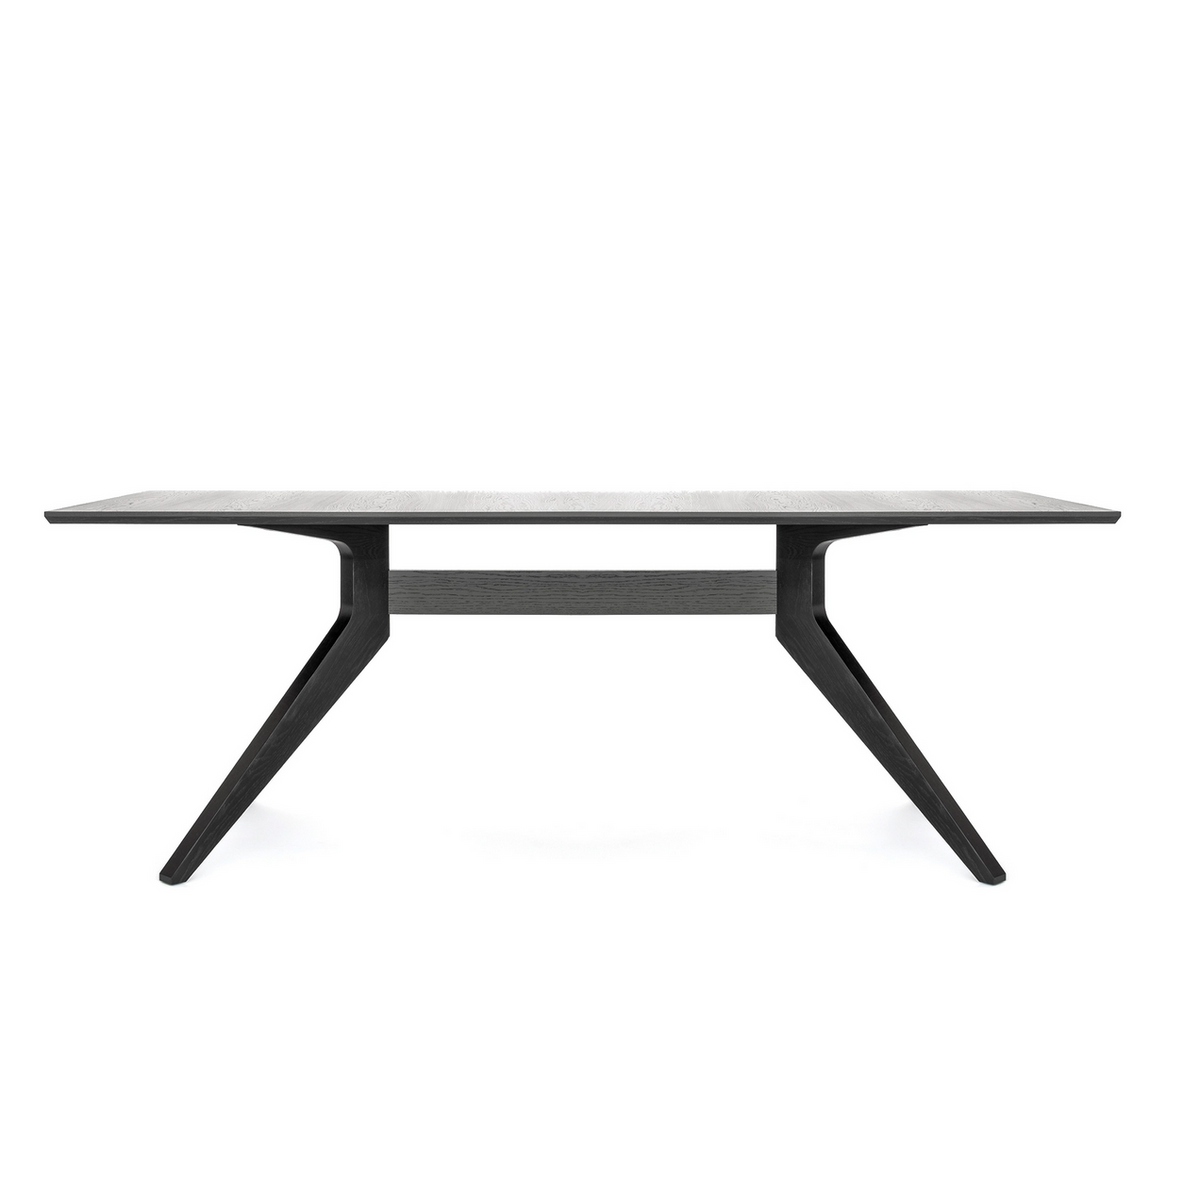 Case Cross Fixed Table